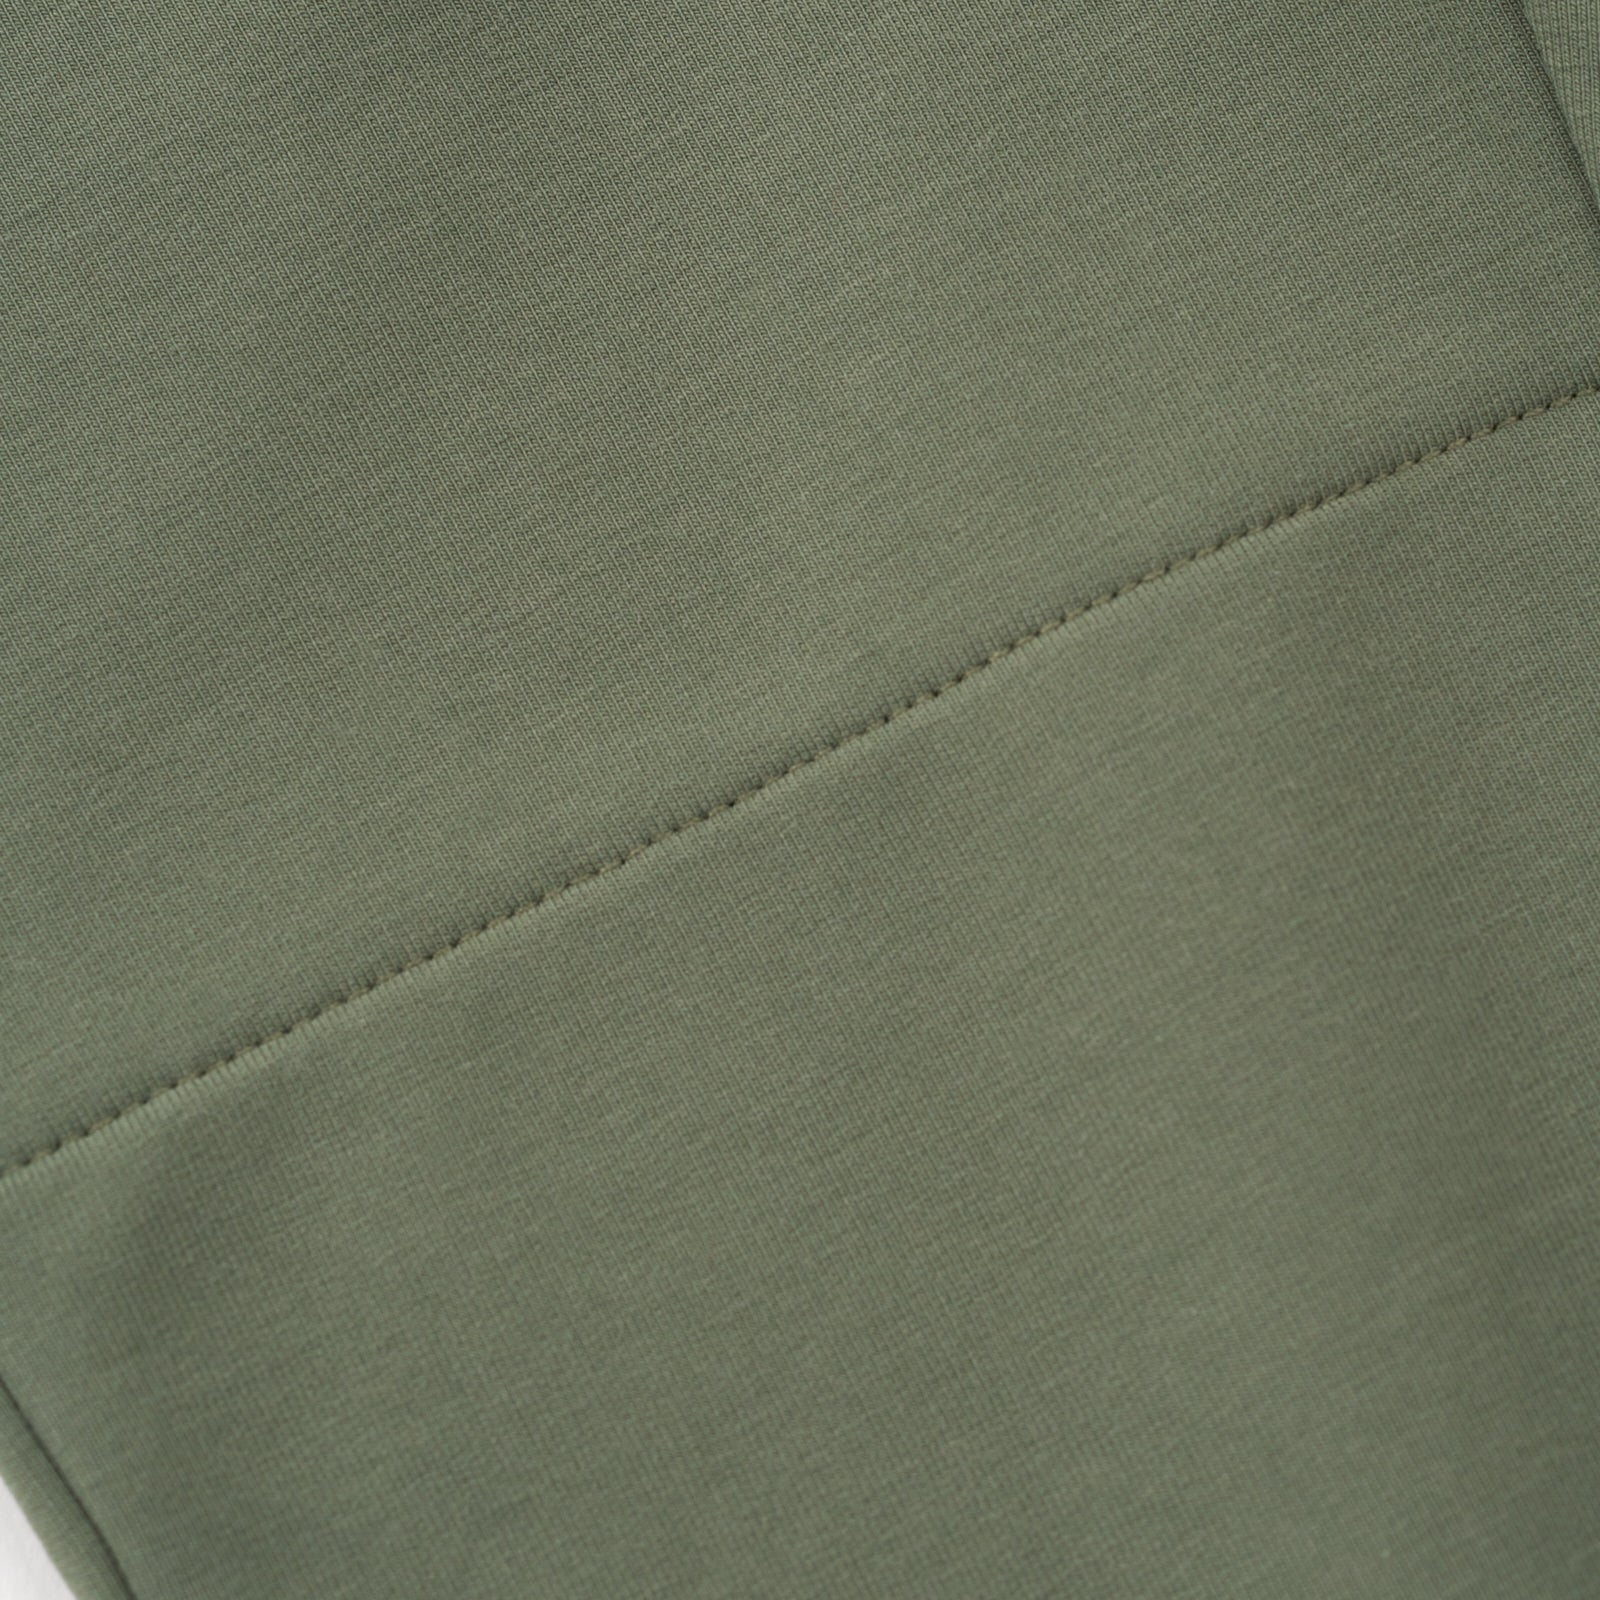 Close up image of the knee detail on the Moss Jogger